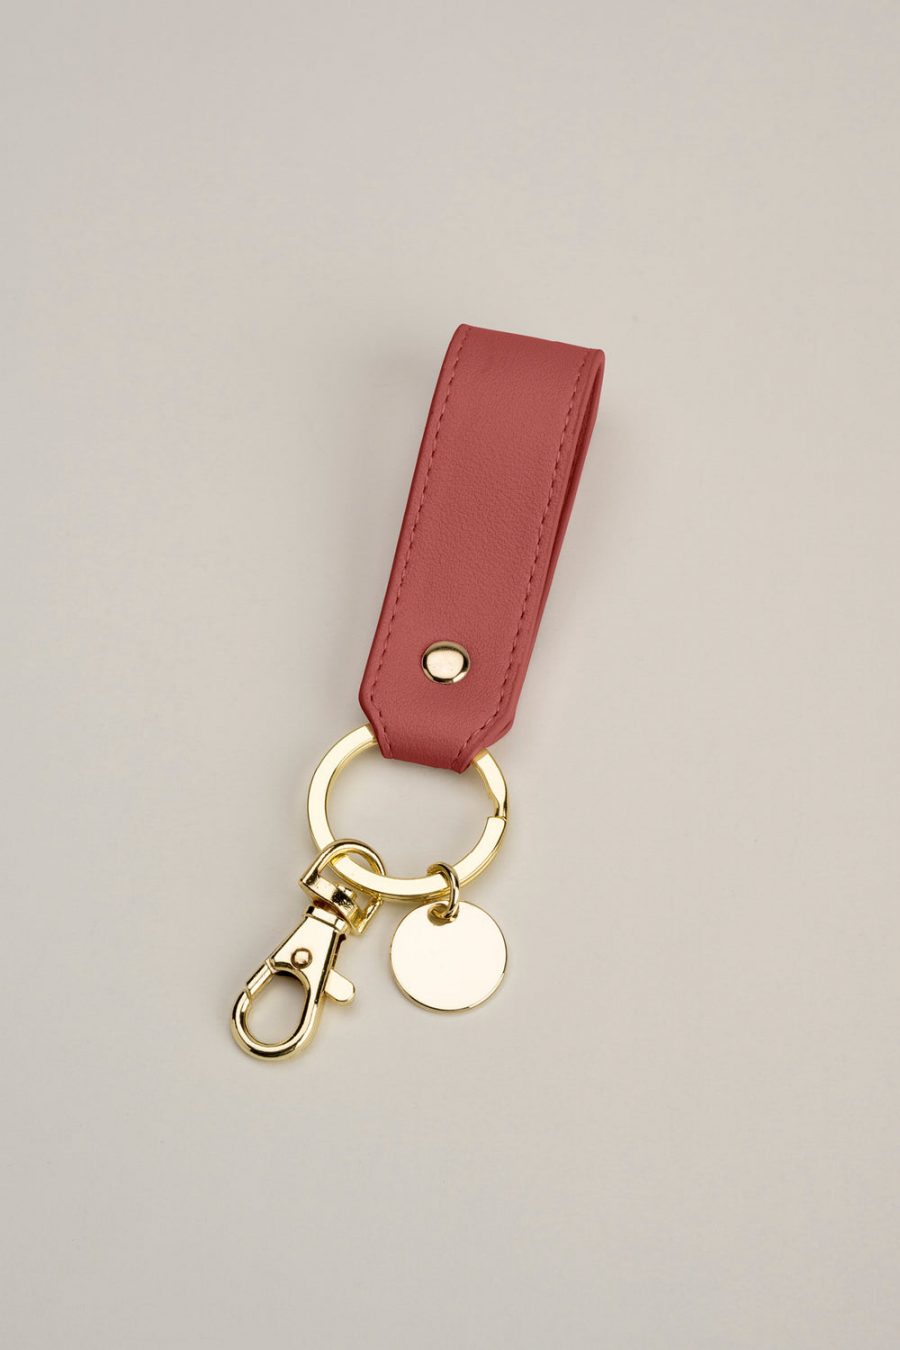 The eleventh key ring strap Clay